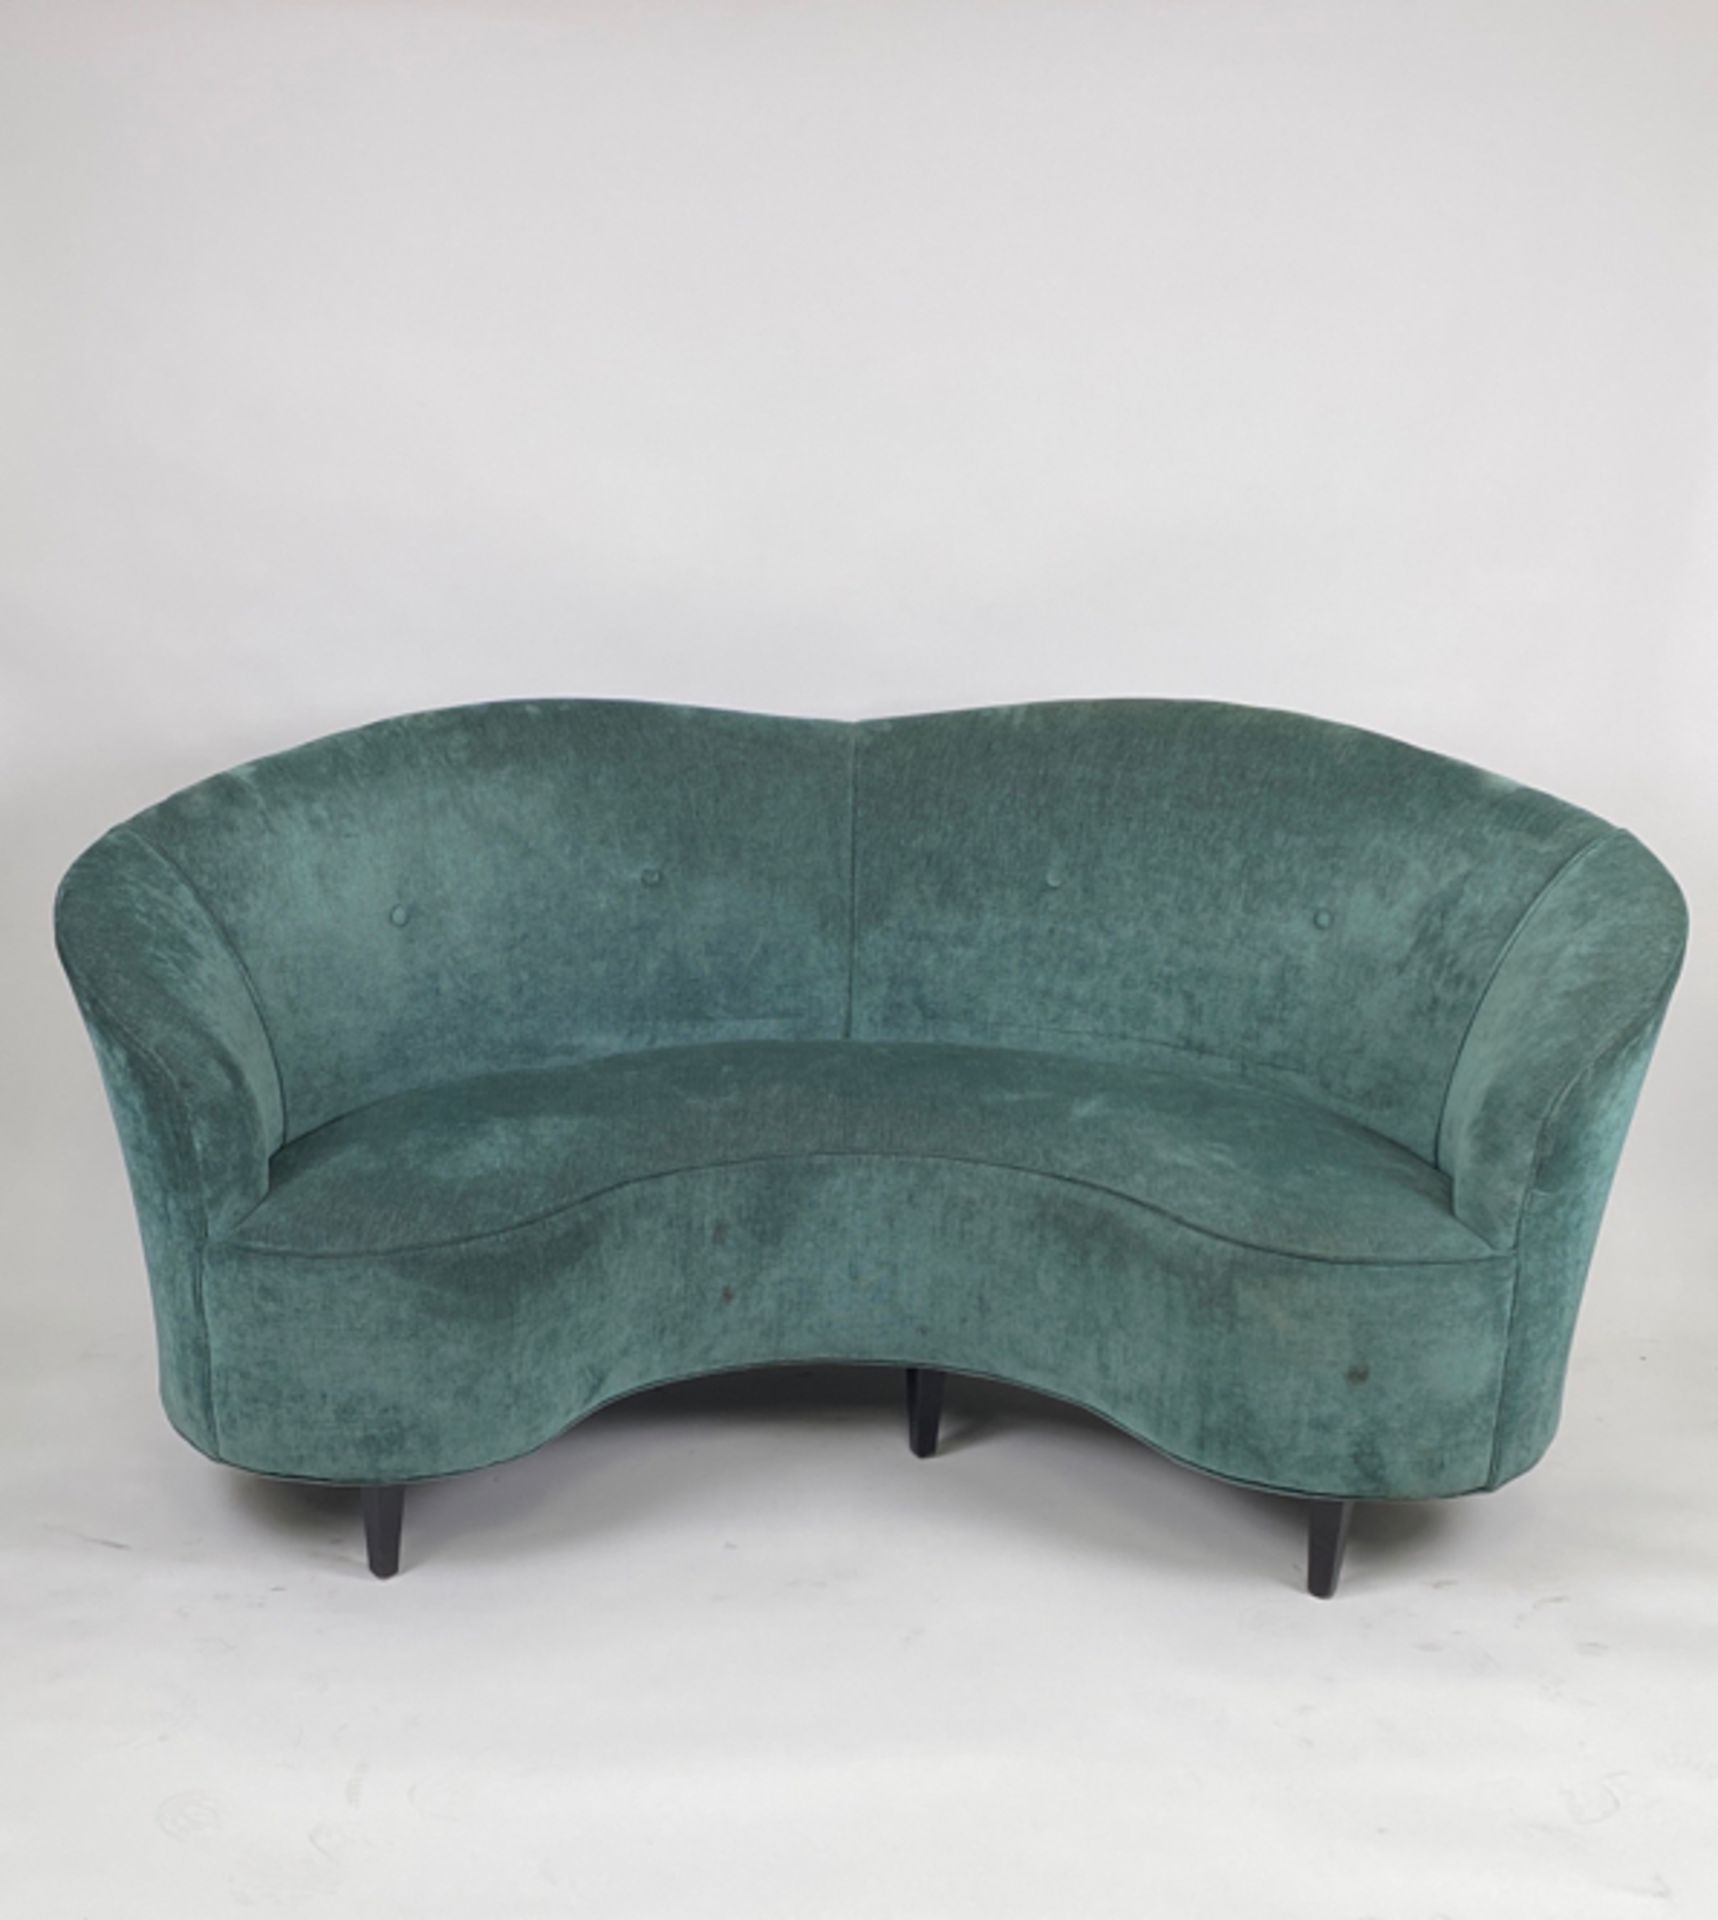 Curved Teal Sofa - Image 2 of 2